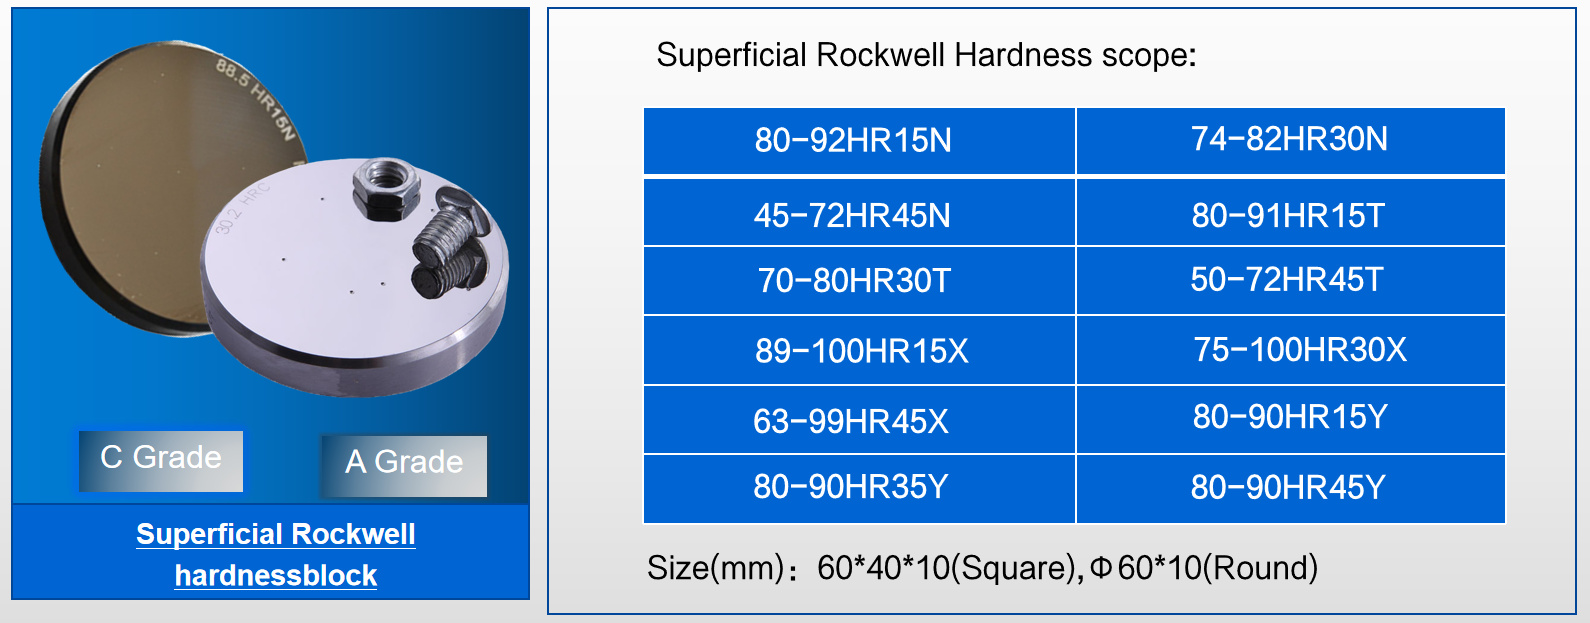 Superficial Rockwell Hardness scope